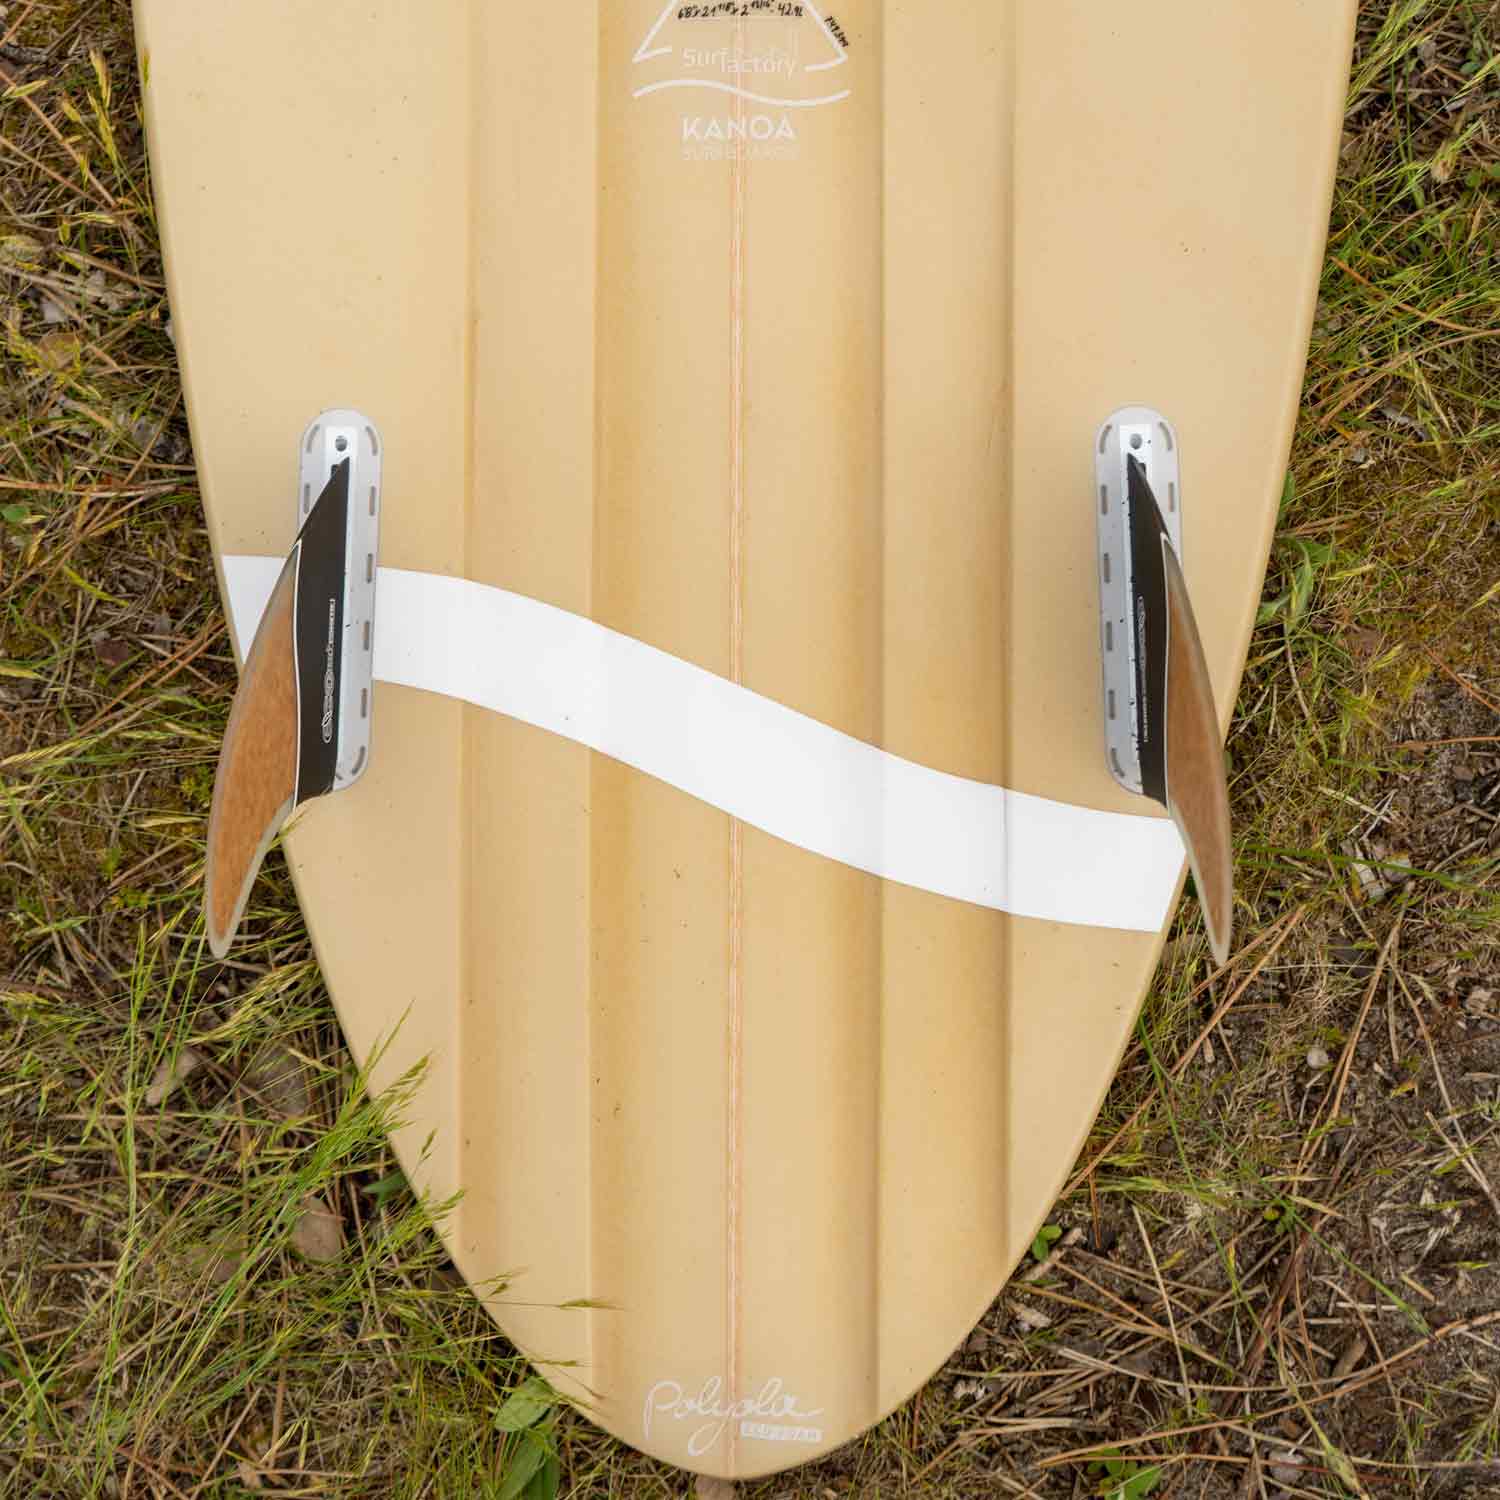 Discover our ecological Polyola Surfboard Range like our Performance Mid-Length Surfboard Twin Tonic with channels